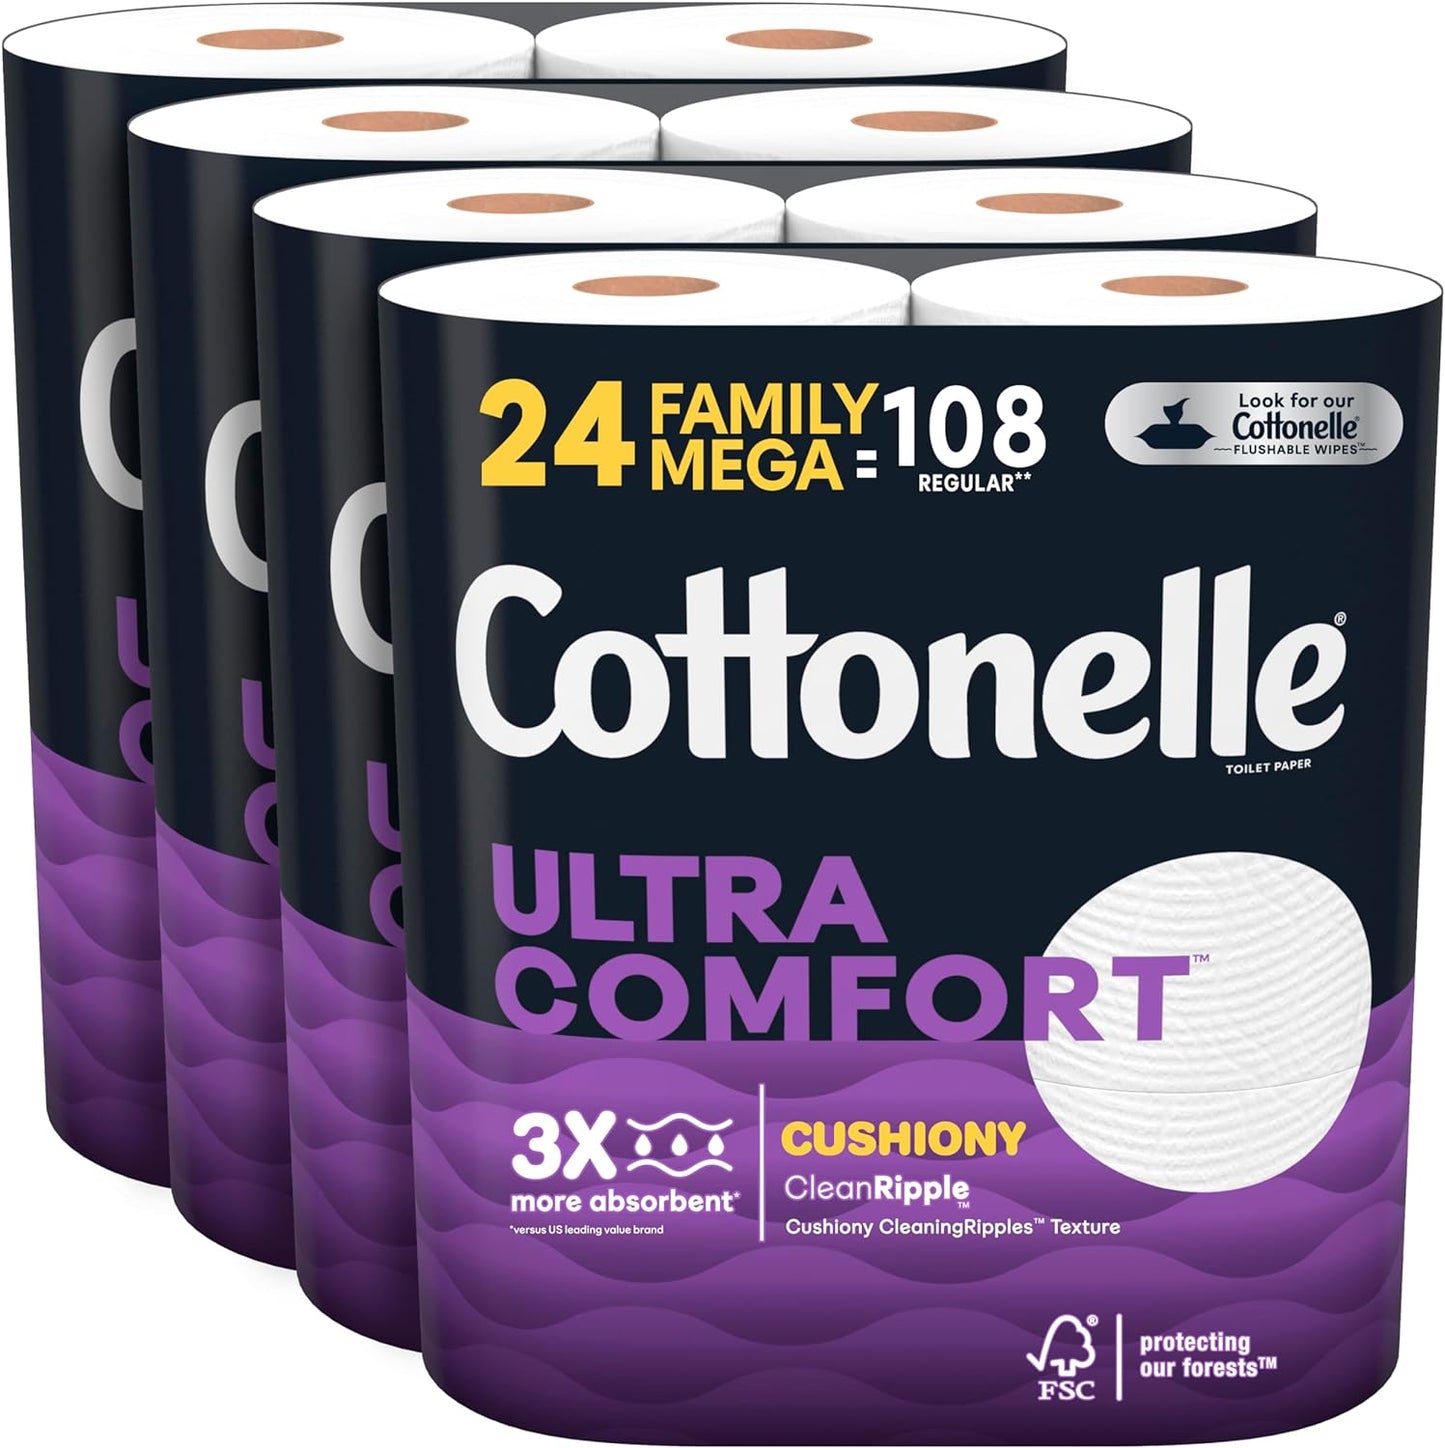 UniitesMarketplace.com™, Cottonelle Ultra Comfort Toilet Paper with Cushiony CleaningRipples, 2-Ply, 24 Family Mega Rolls (4 Packs of 6) (24 Family Mega Rolls = 108 Regular Rolls), 325 Sheets per Roll, Packaging May Vary, $27.91